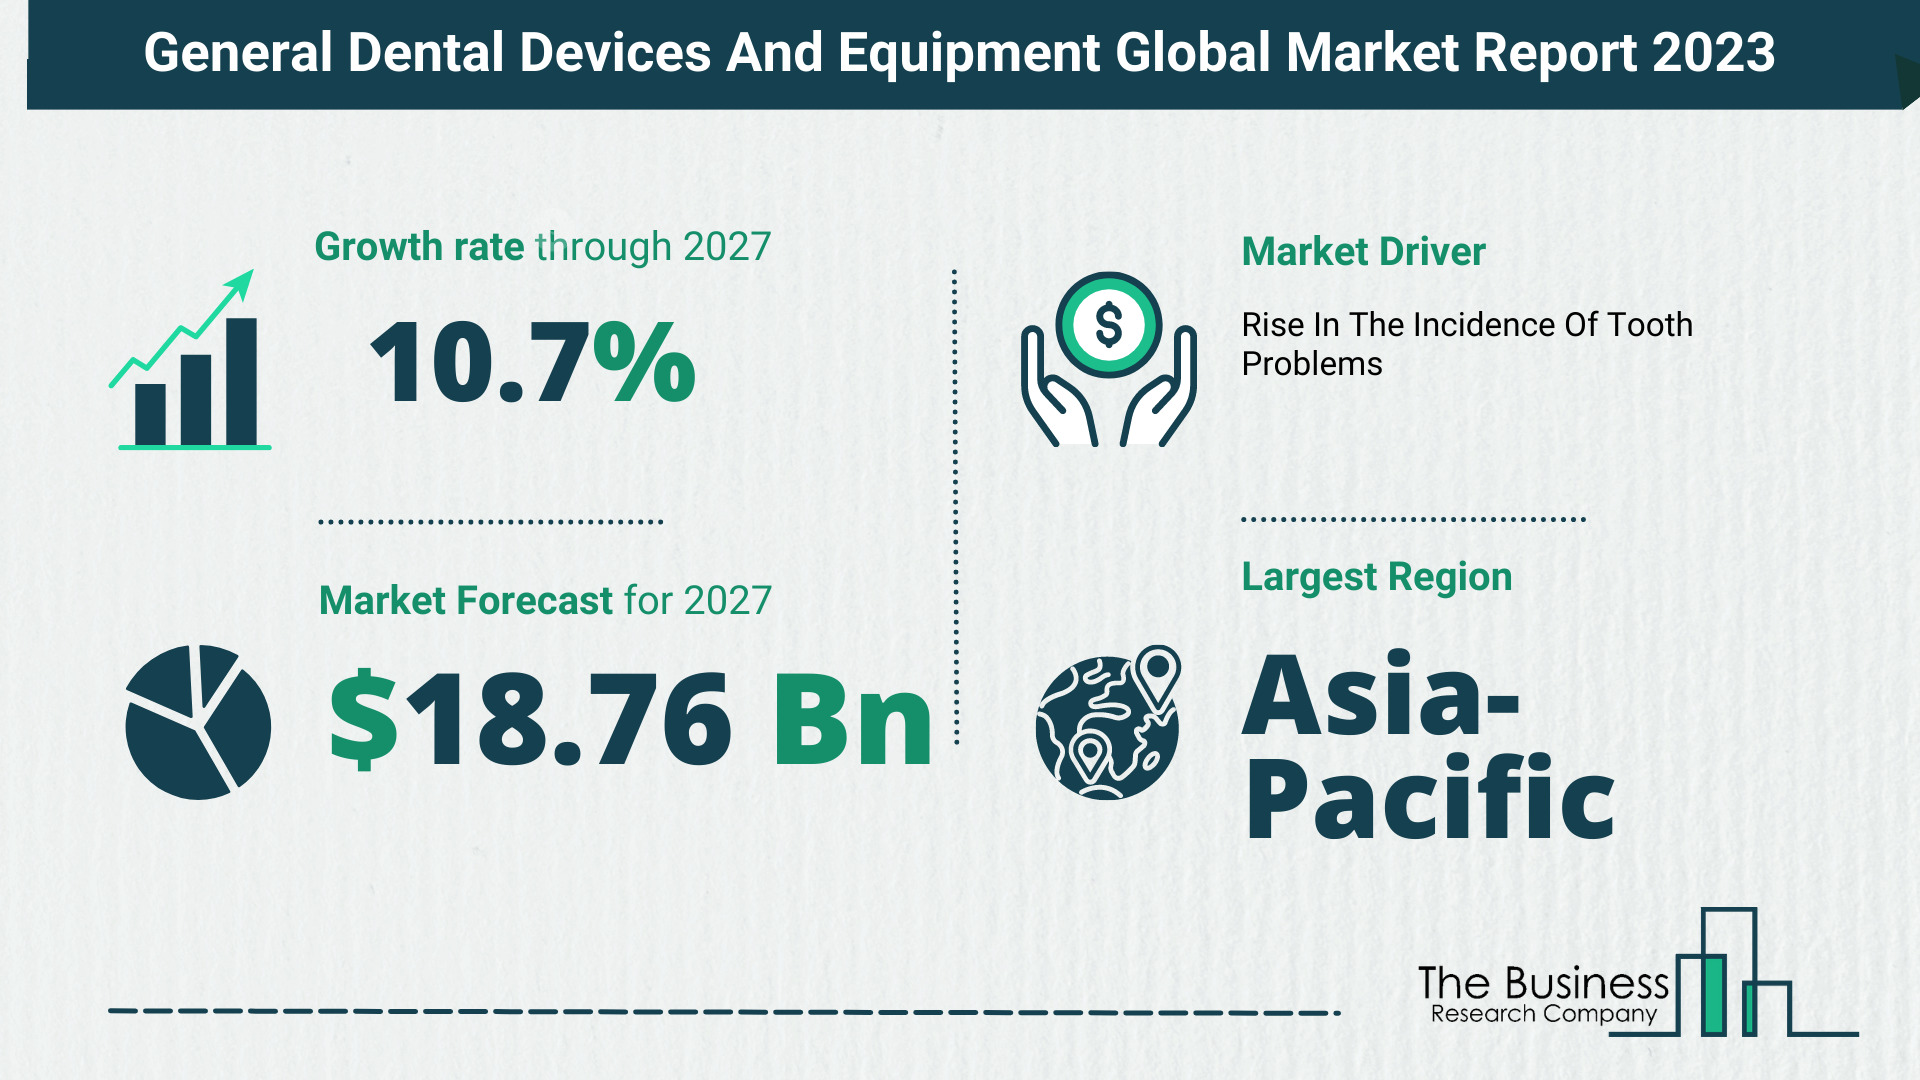 Global General Dental Devices And Equipment Market Opportunities And Strategies 2023